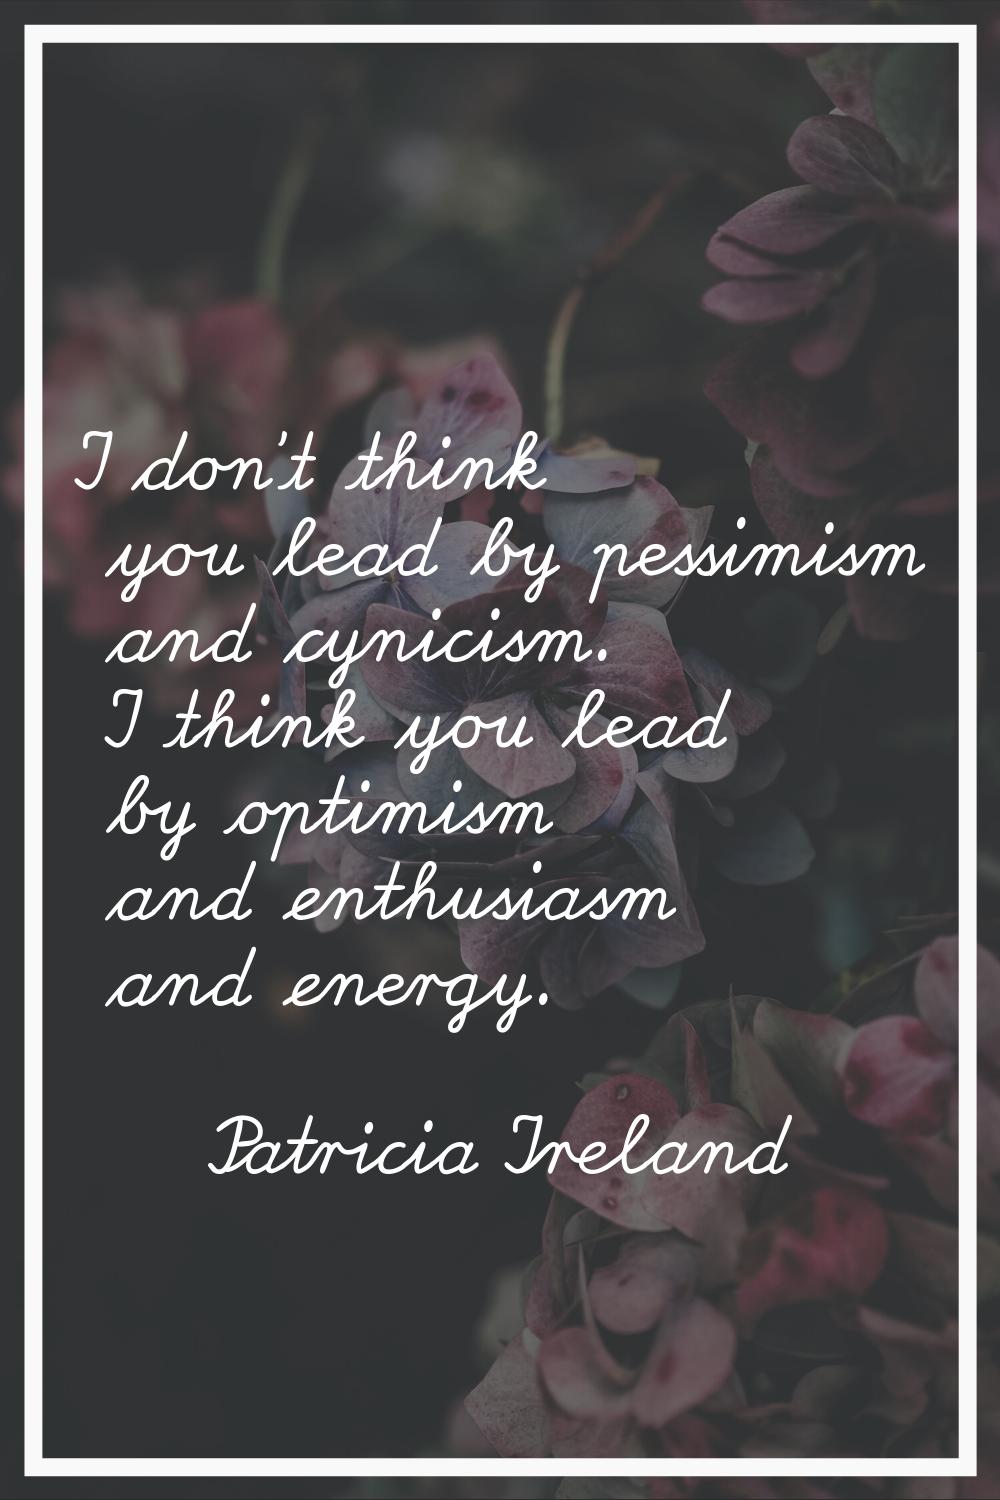 I don't think you lead by pessimism and cynicism. I think you lead by optimism and enthusiasm and e